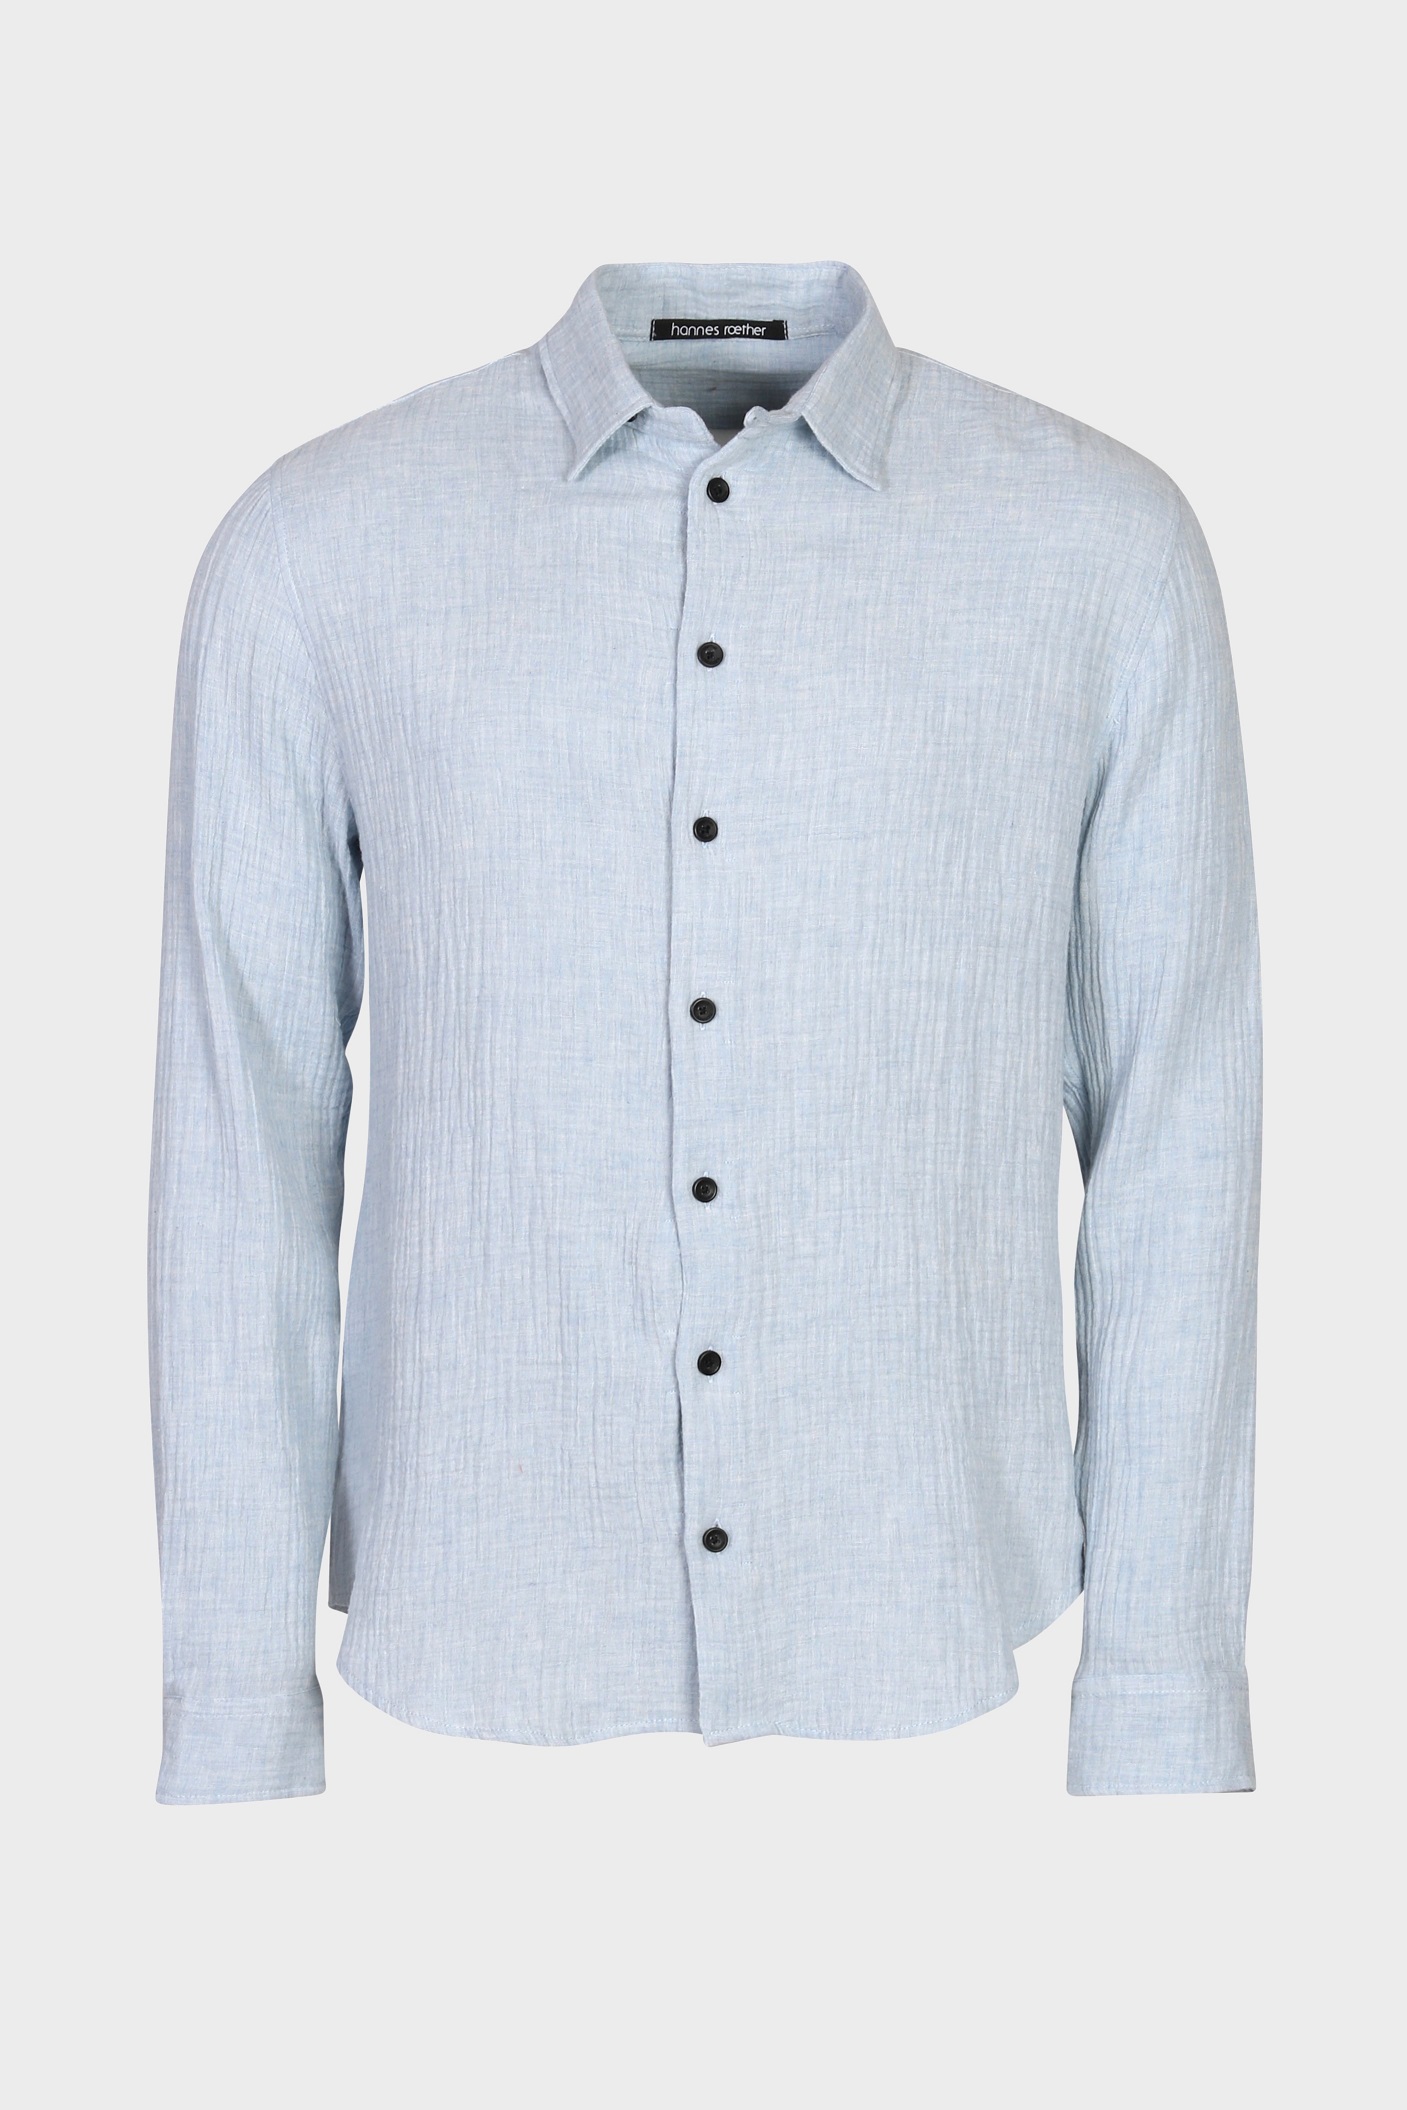 HANNES ROETHER Mousseline Shirt in Light Blue XL